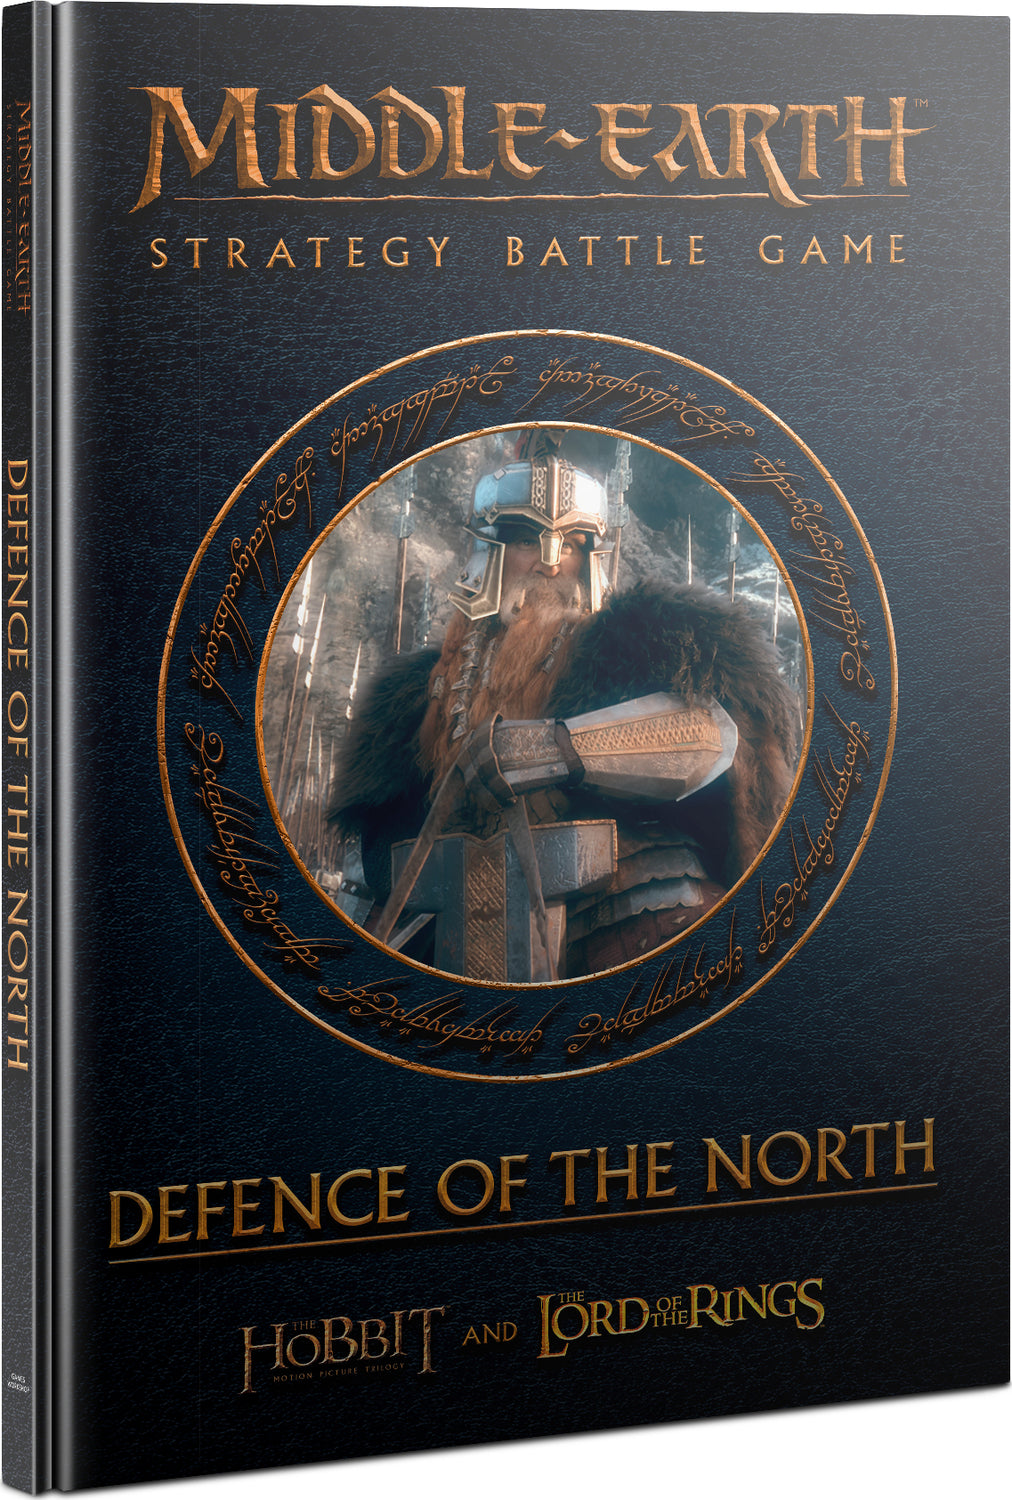 M-E SBG: DEFENCE of THE NORTH